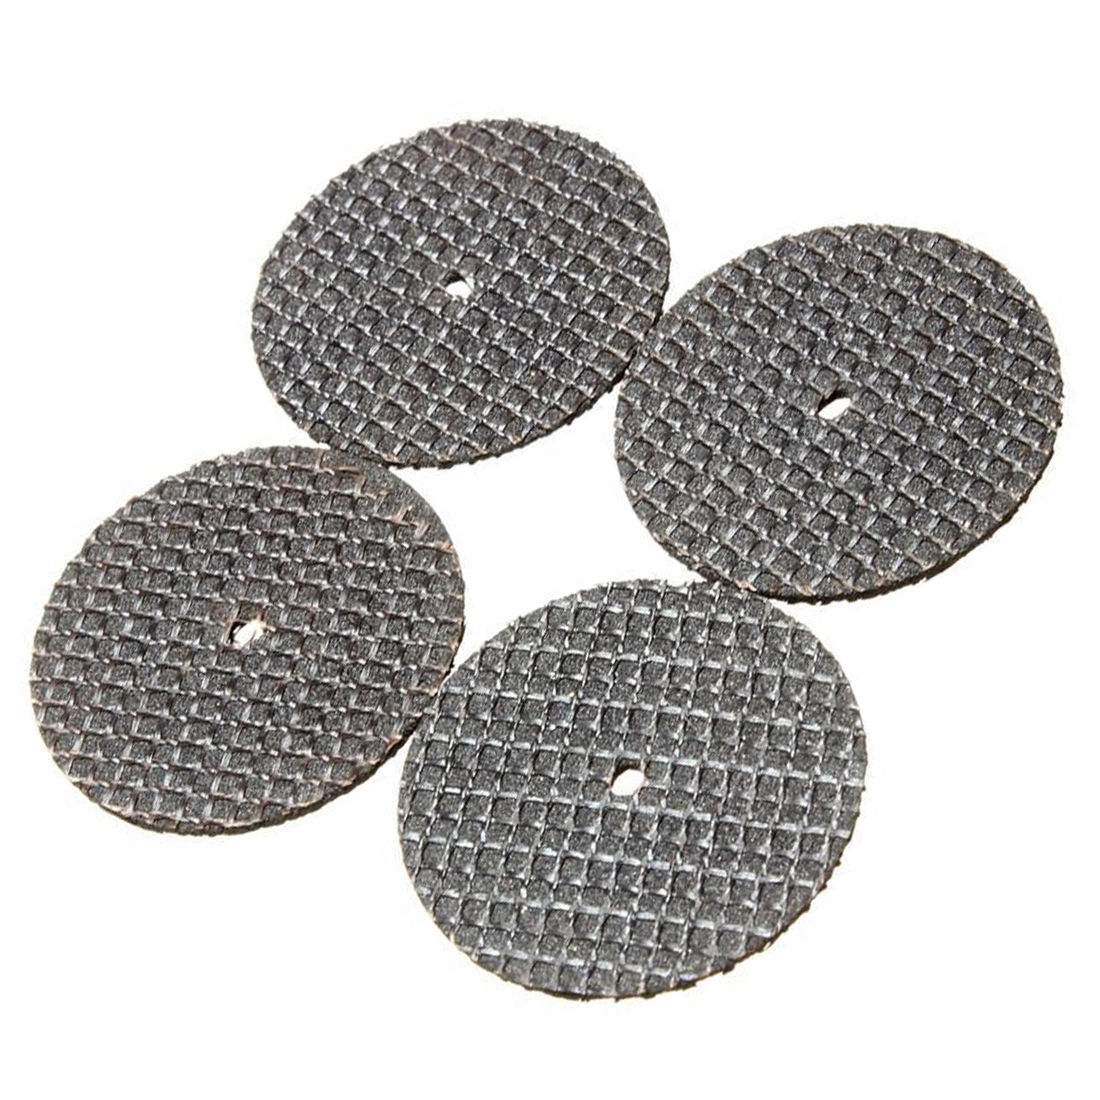 30pcs Metal Cutting Disc Tool Accessories Abrasive Tools Grinder Rotary Tool Circular Saw Blade Woodworking metal Drill Rotary